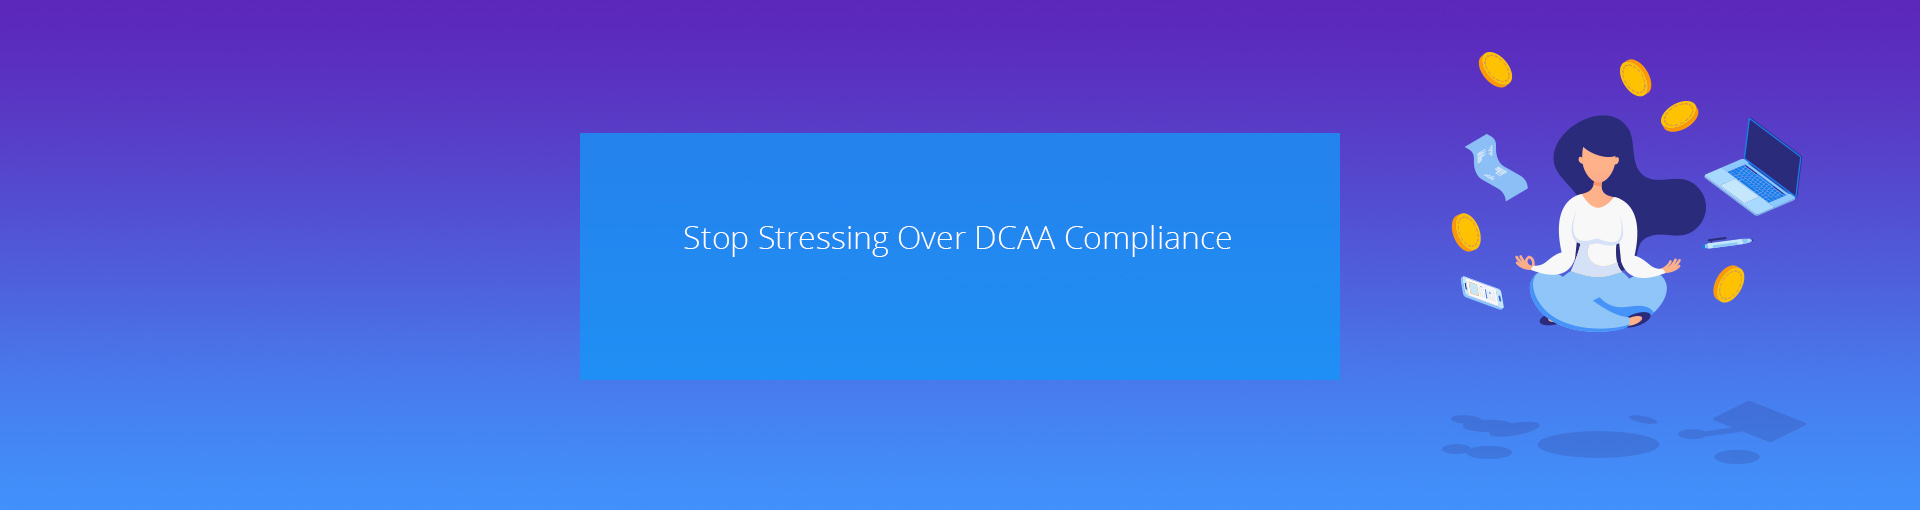 Stop Stressing Over DCAA Compliance Featured Image